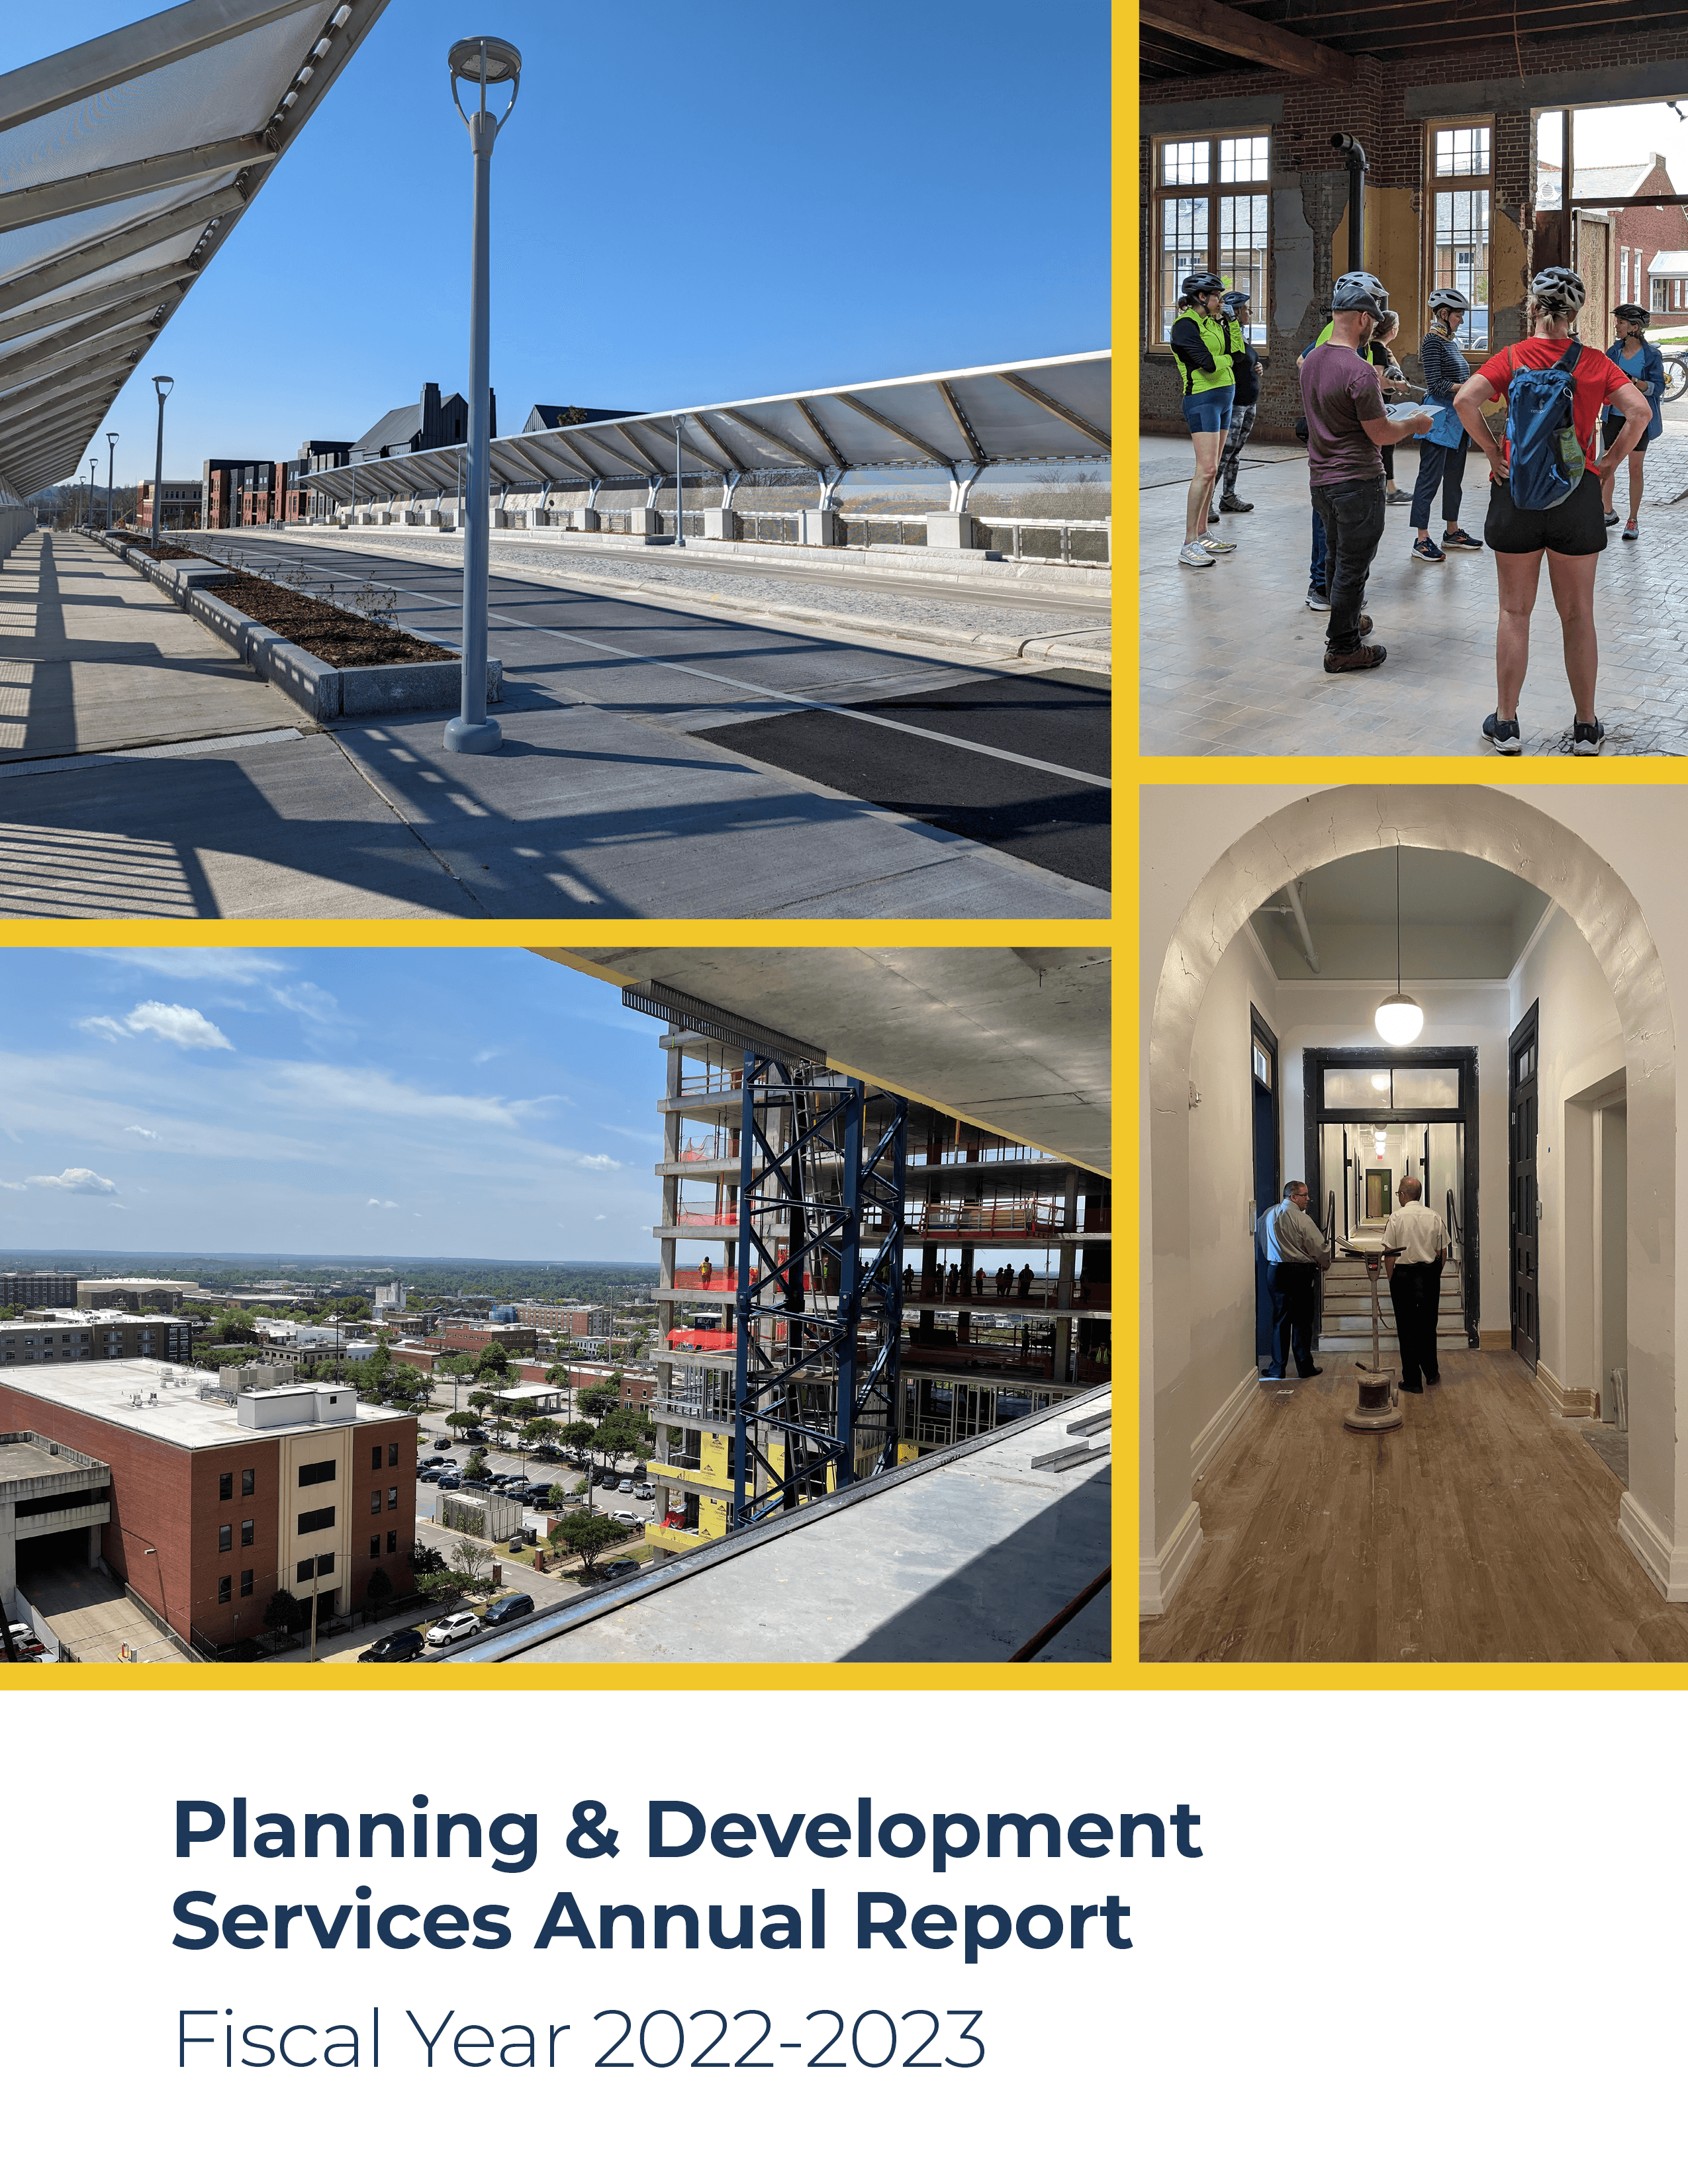 The cover page of the Planning & Development Services Annual Report has four pictures of varying sizes against a gold background, clockwise from upper left, of the completed Greene Street Bridge facing towards Huger Street; individuals with bicycle helmets standing in the laundry building at Bull Street, receiving a tour from Amy Moore, Principal Preservation Planner; Chief Building Official Todd Beiers and Fire Marshal Steve Hartwig inspecting a hallway with arches; and the view from an unfinished multistory steel and concrete building over the Vista. Below the pictures is the text “Planning & Development Services Annual Report Fiscal Year 2022-2023” in navy, against a white background.